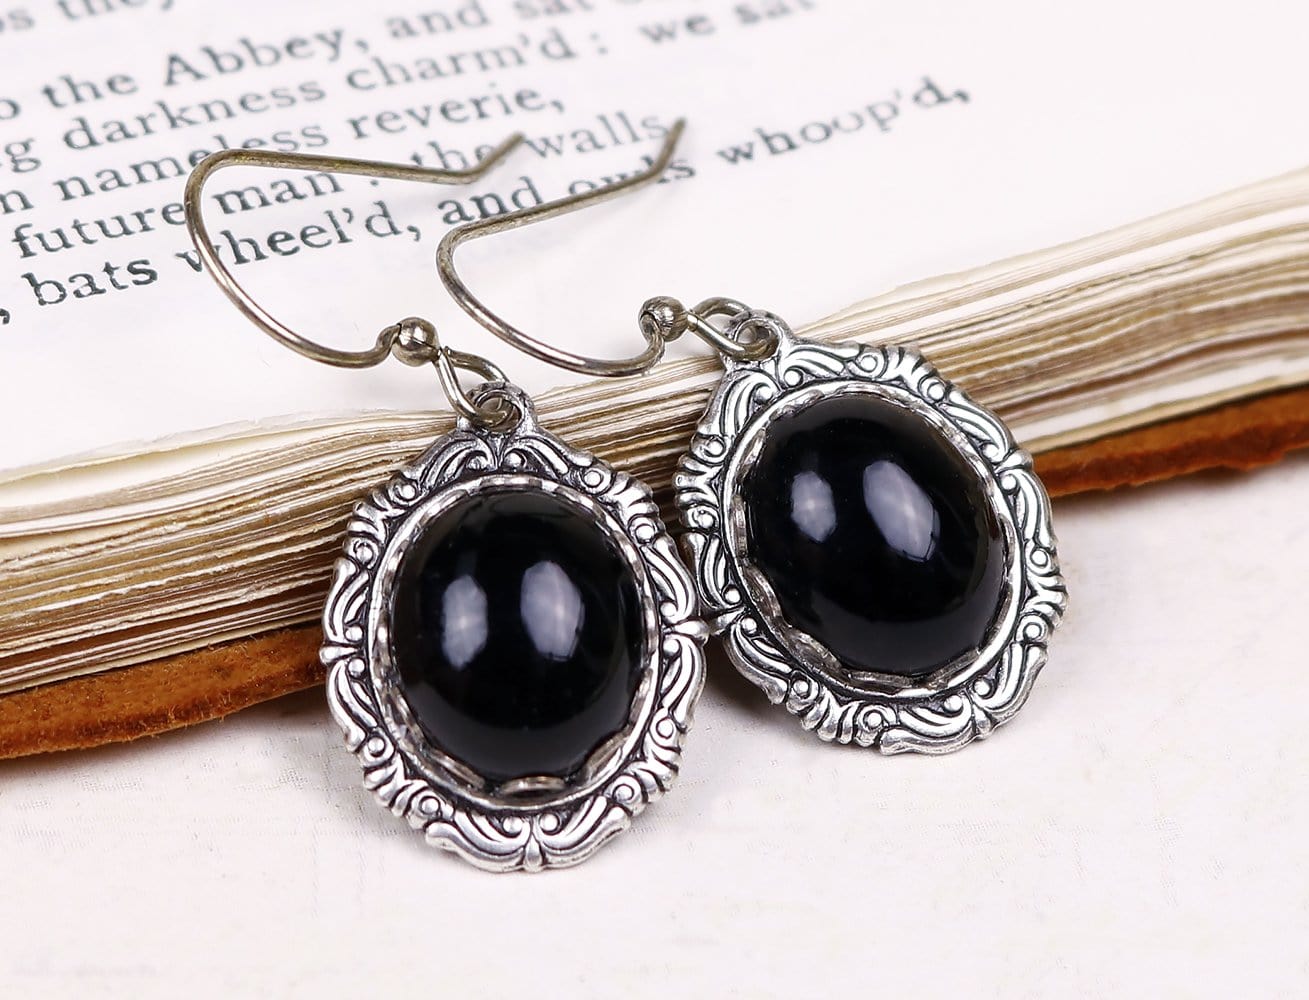 Perceval Earrings in Black - Antiqued Silver by dosha of Rabbitwood & Reason